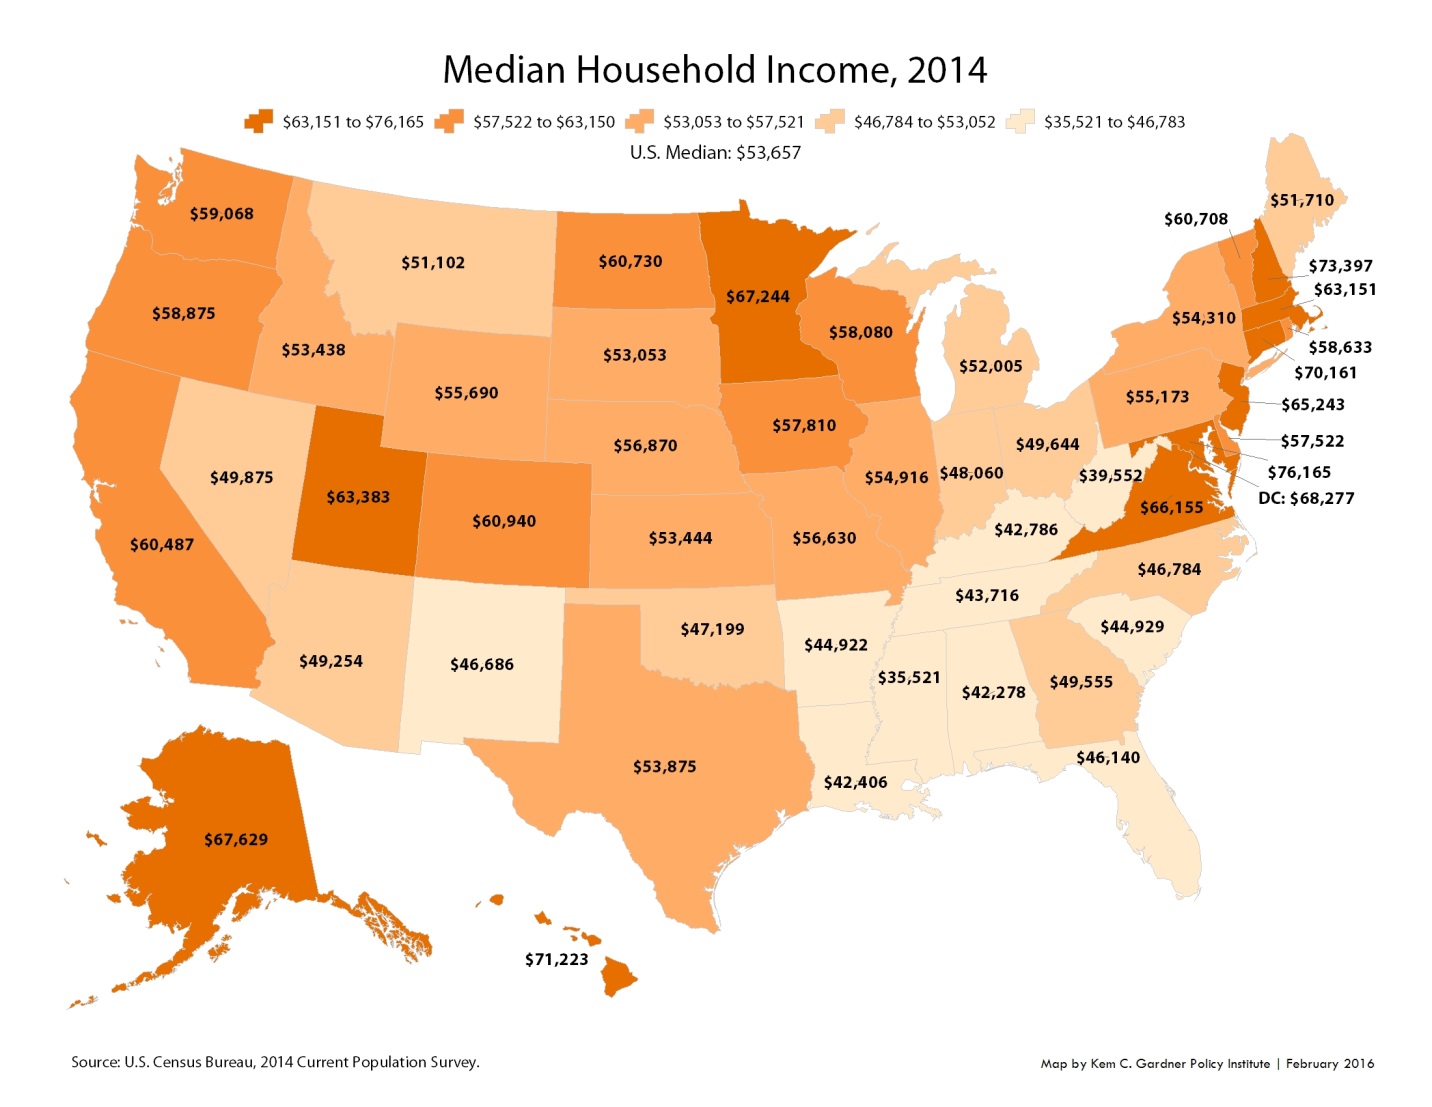 How Meaningful Are the Median Household Income Estimates